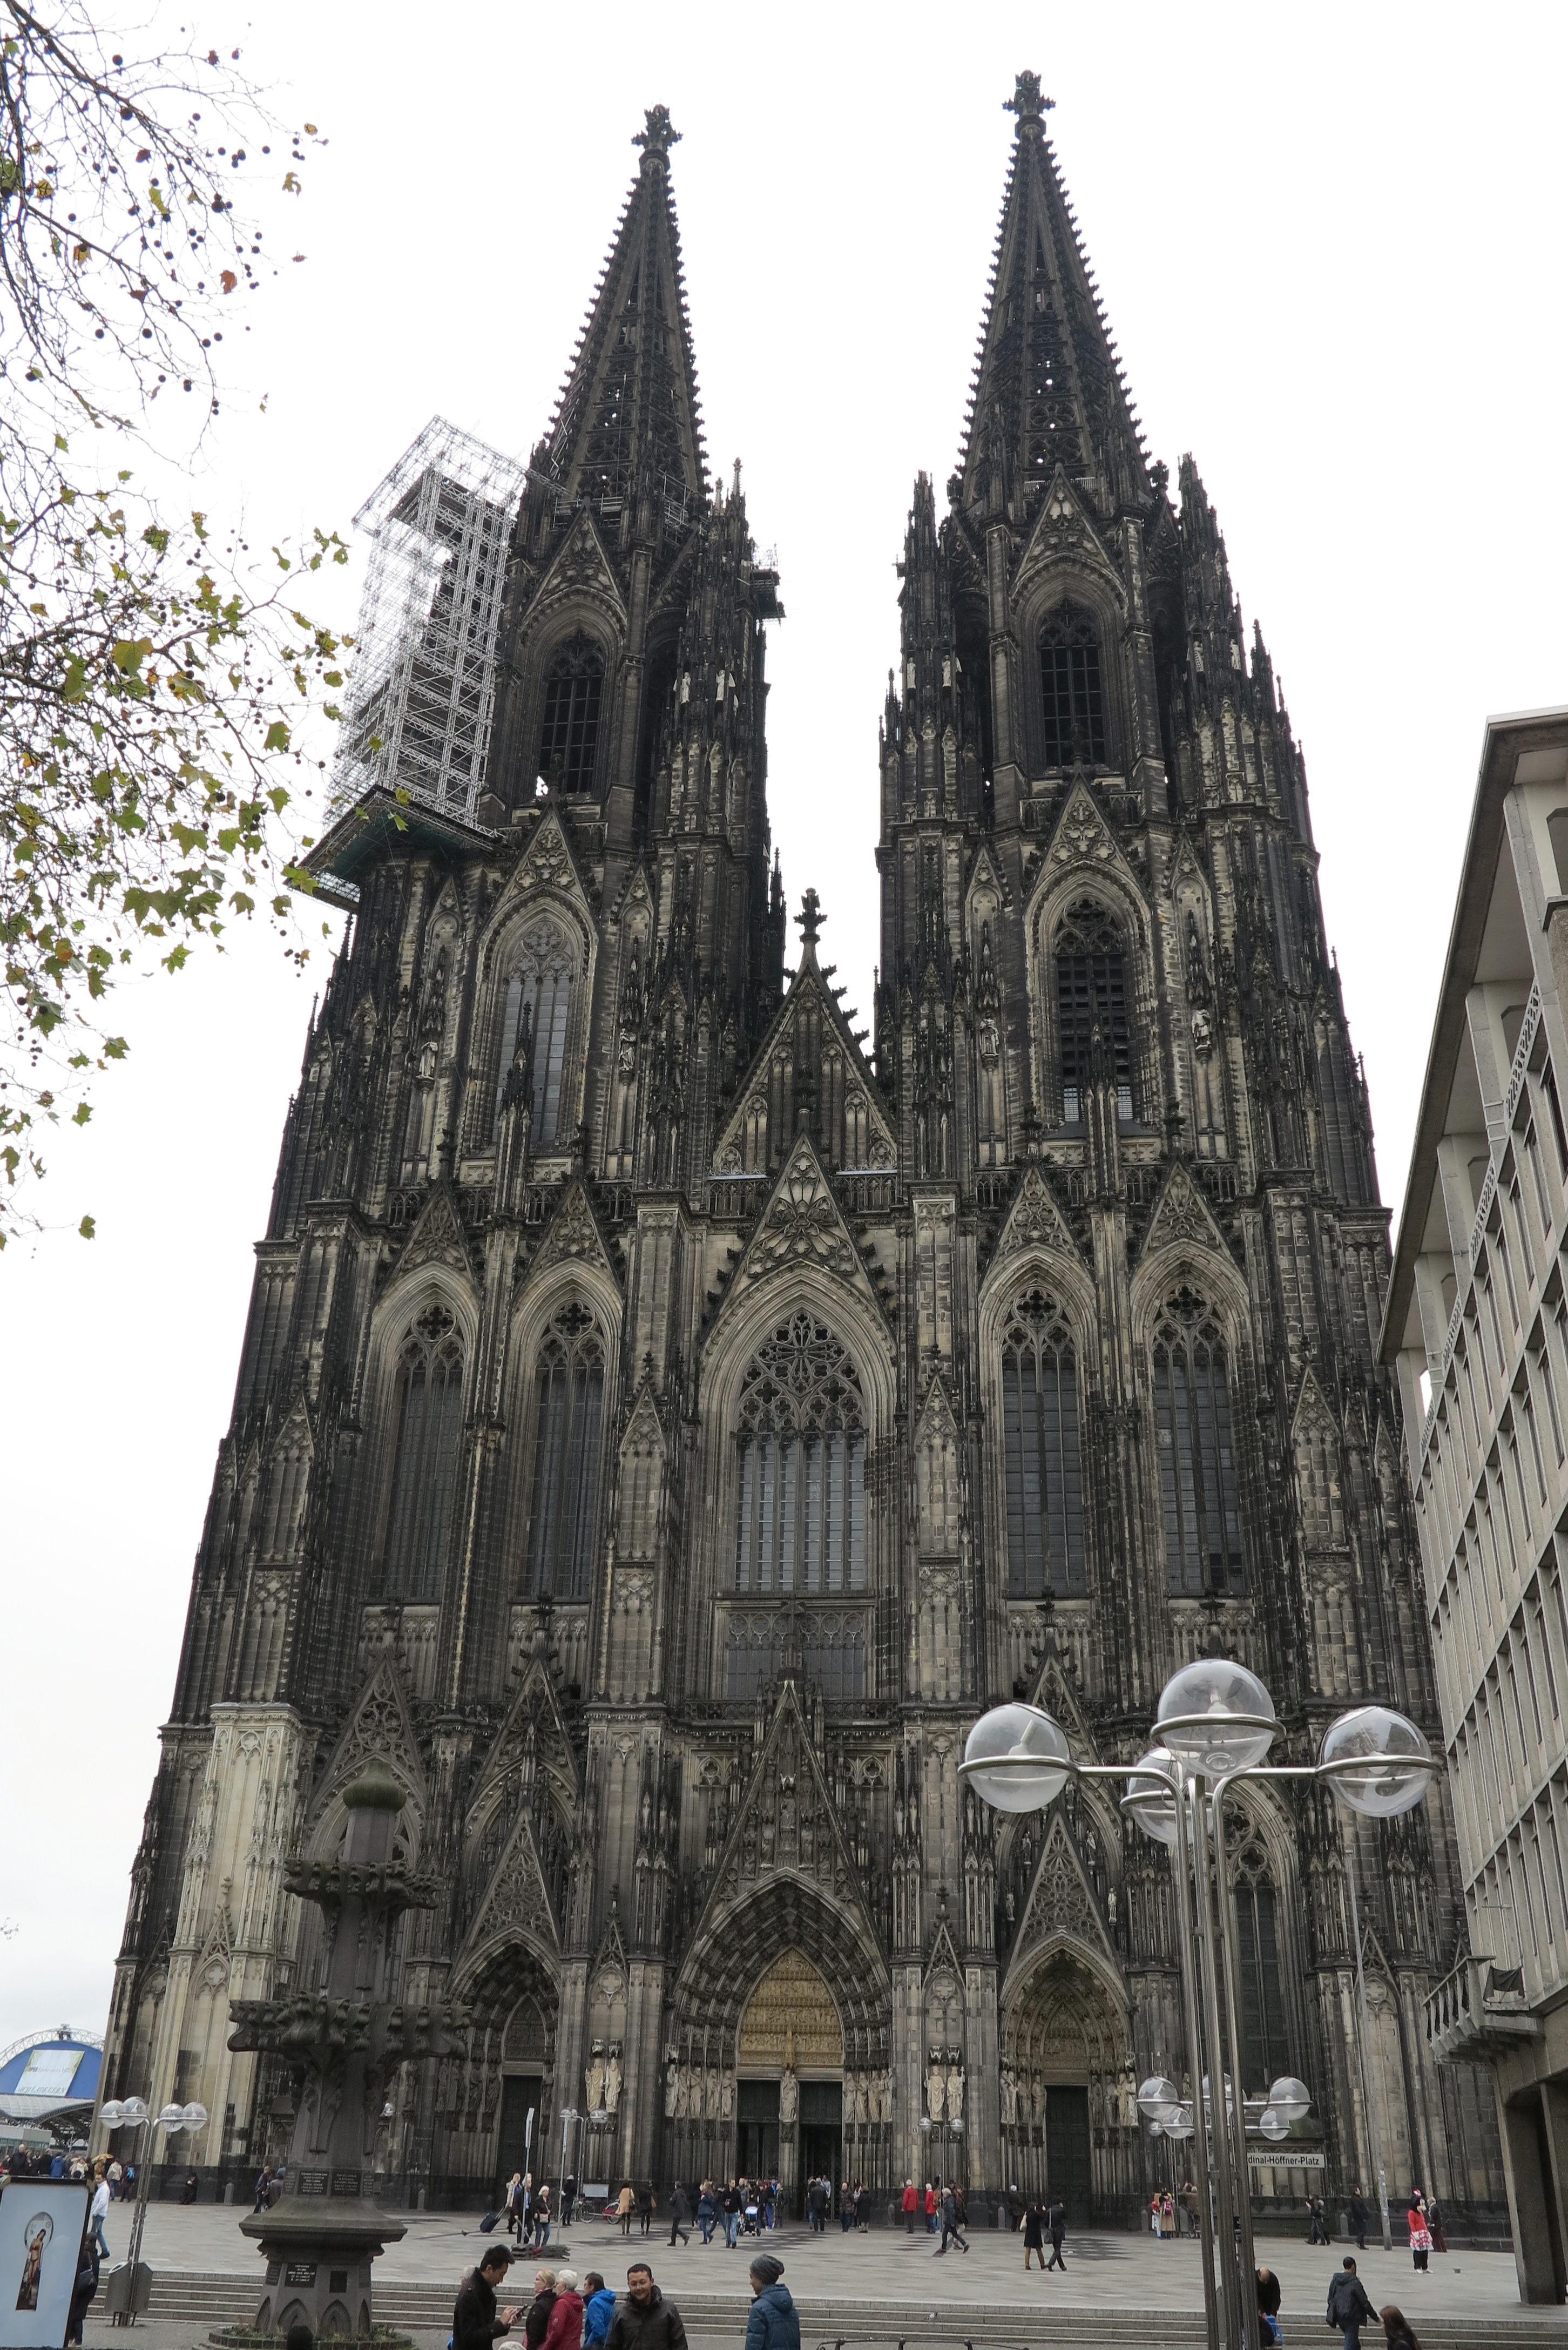 Imposing: The cathedral in Cologne